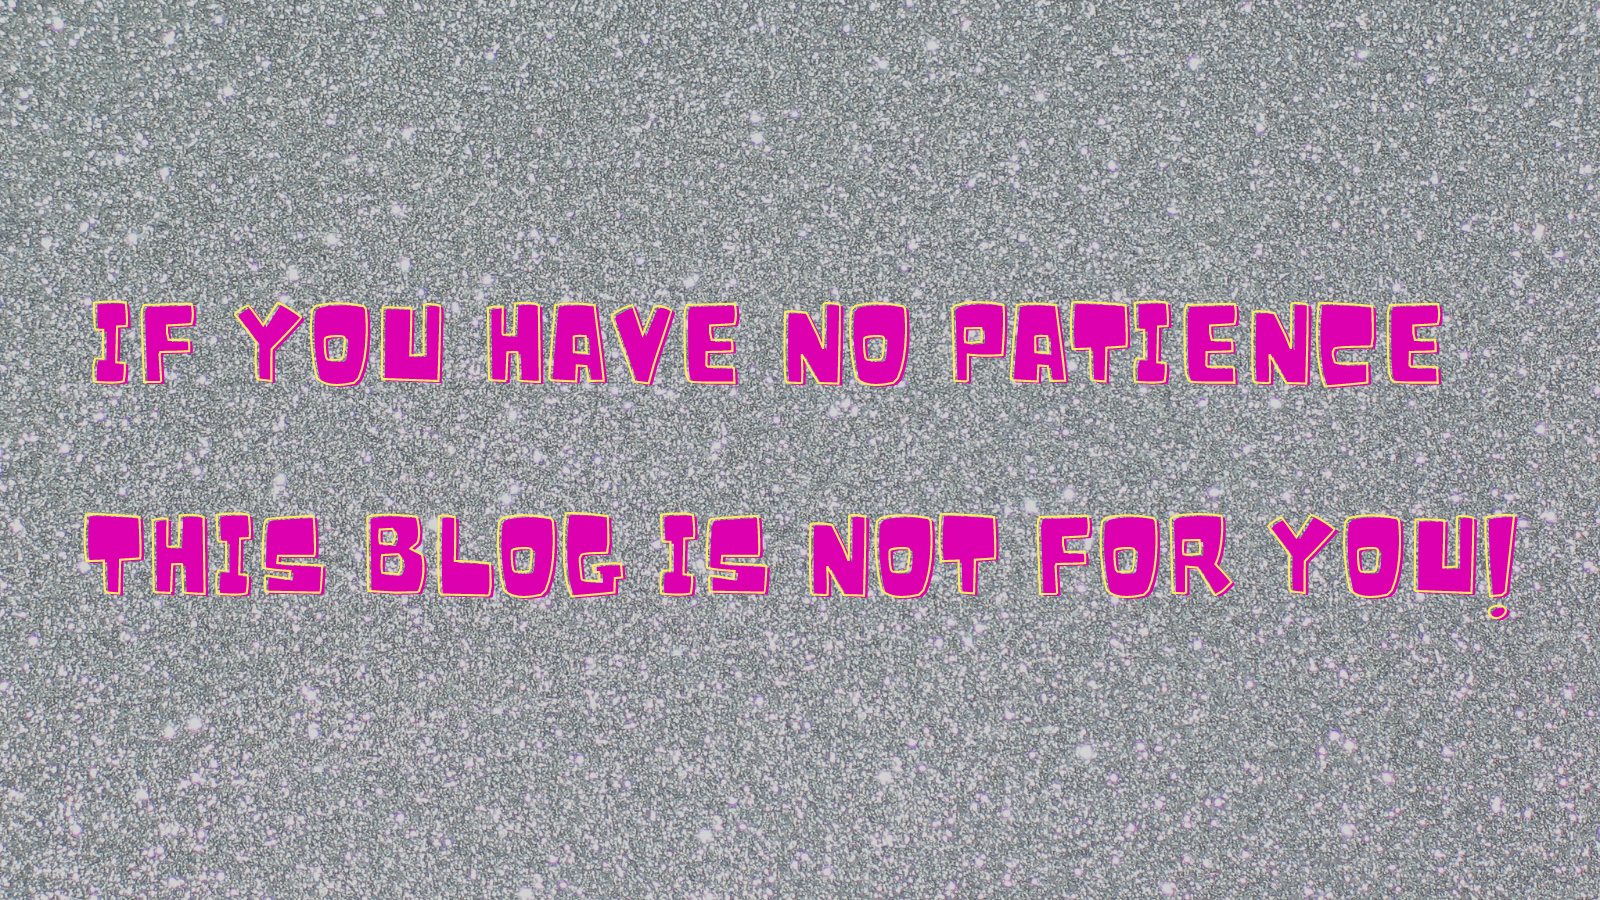 If you have no patience this blog is not for you!